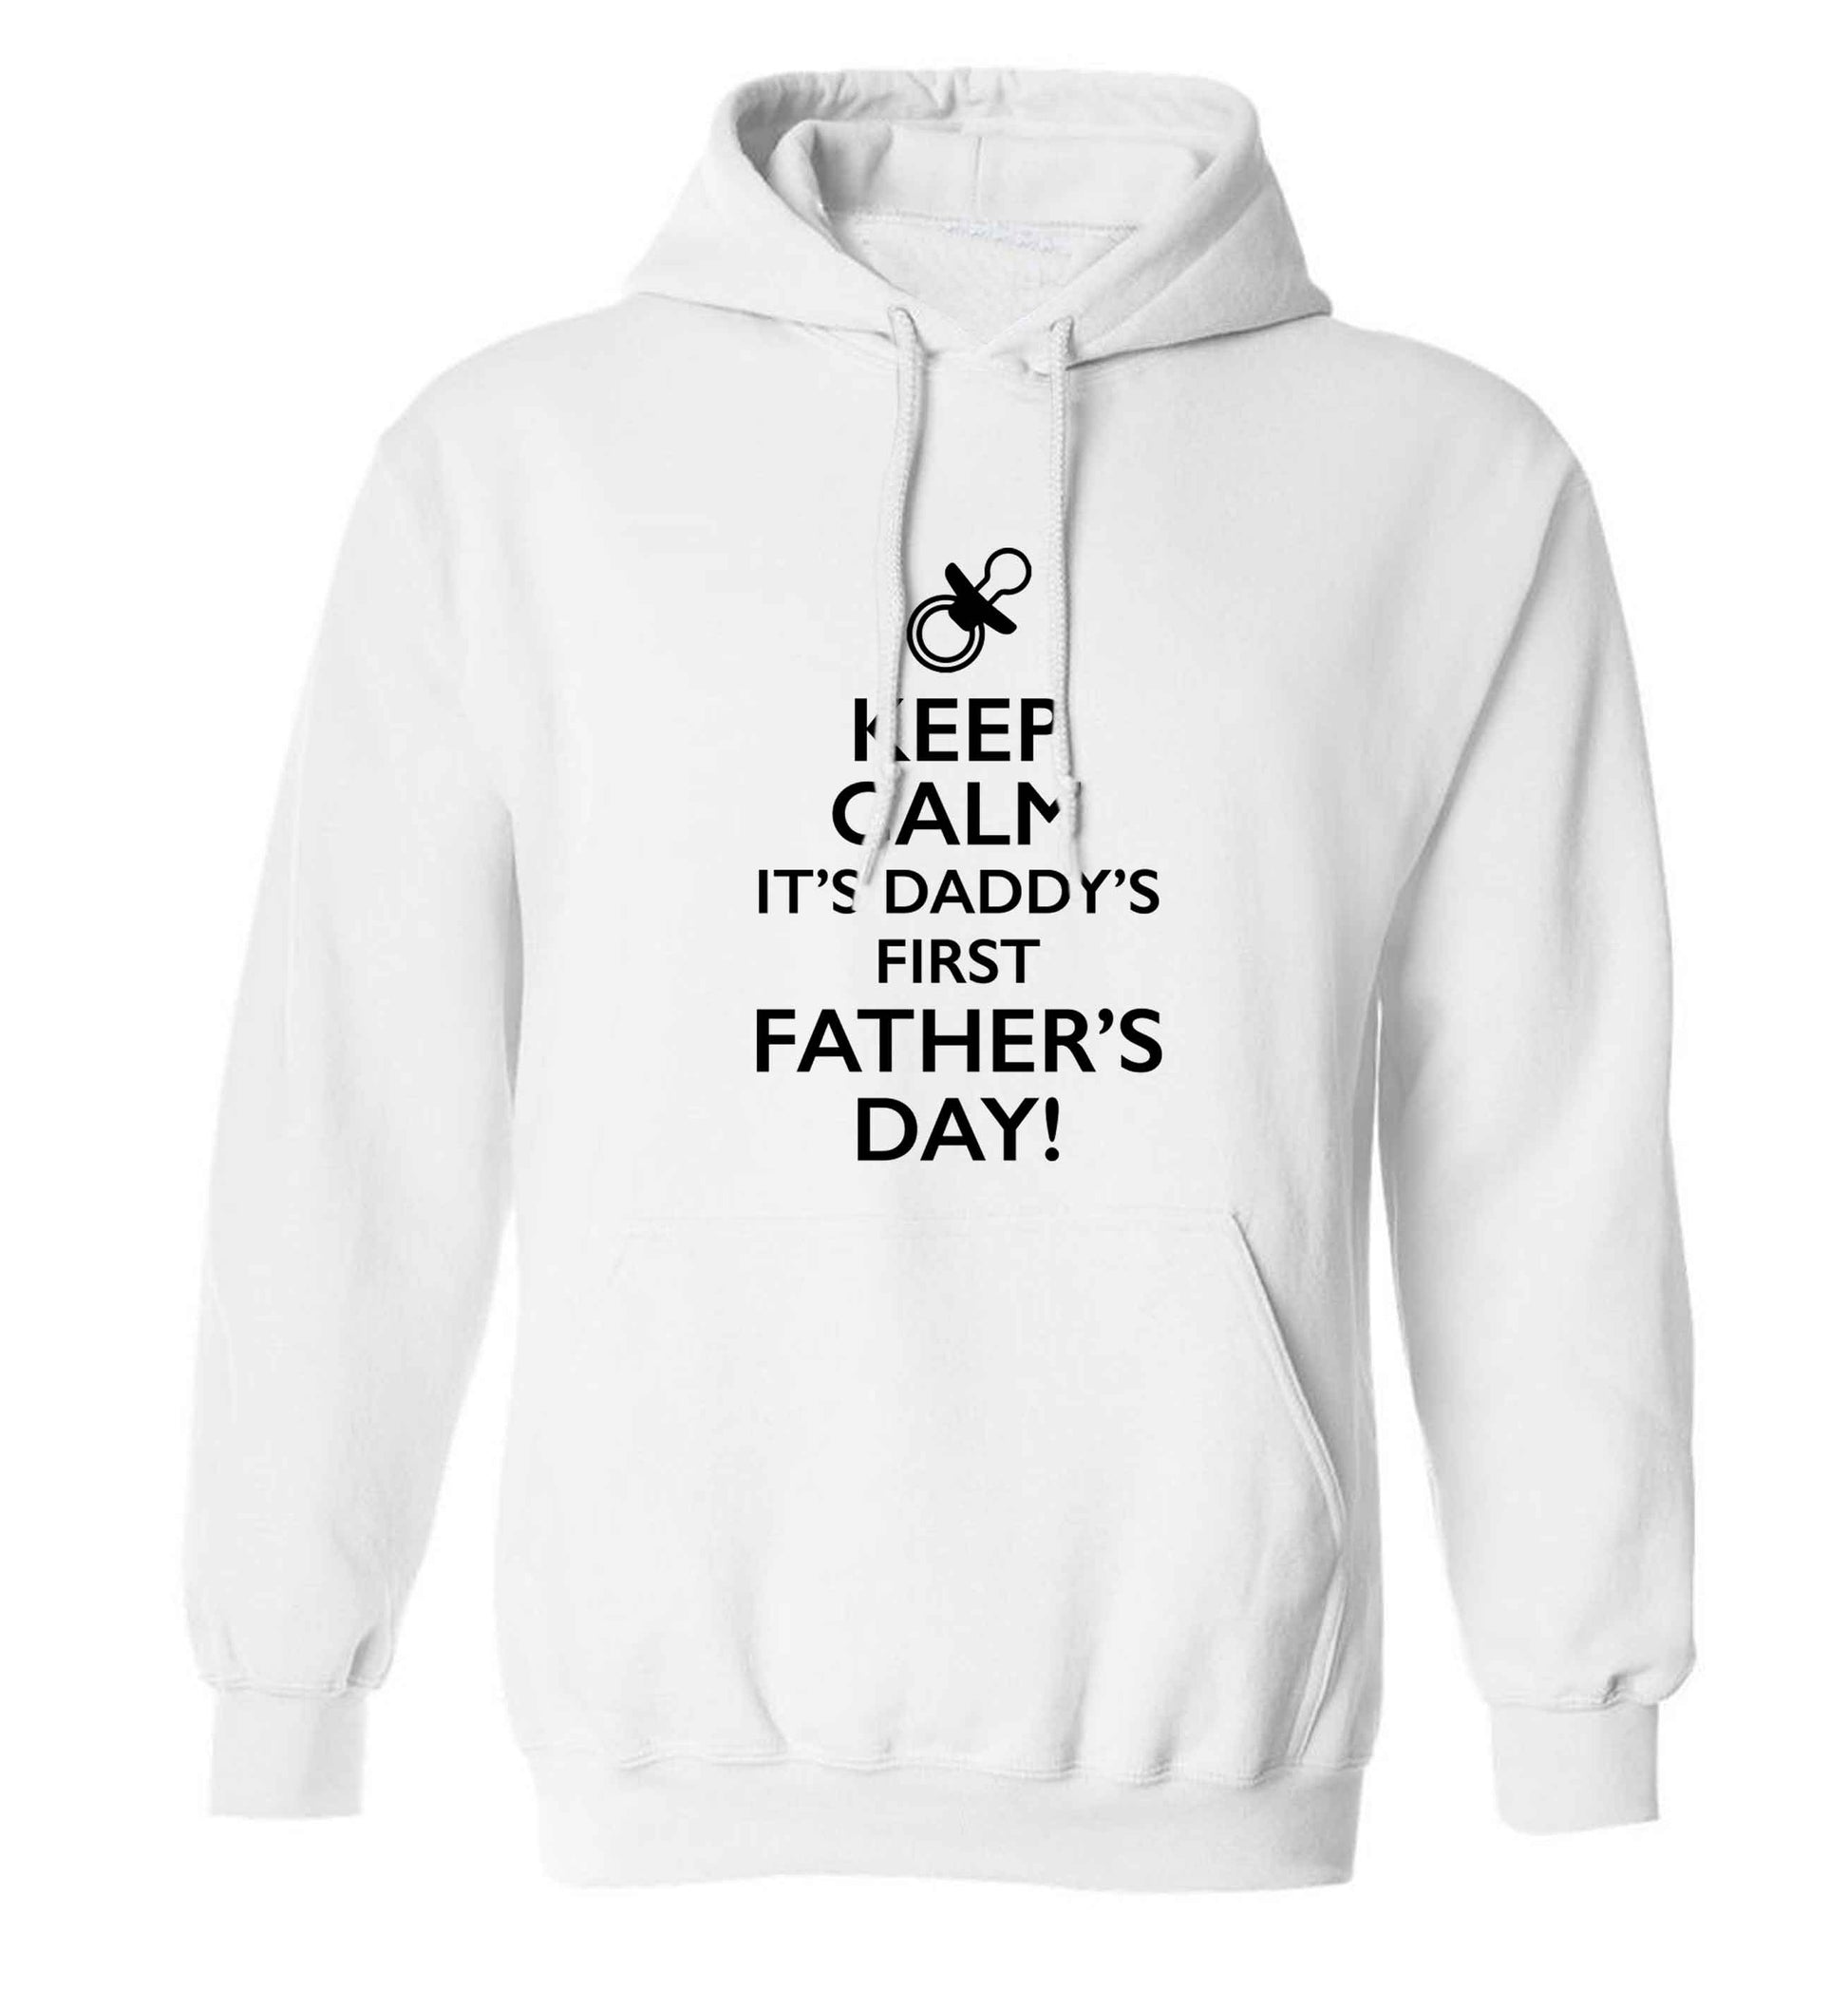 Keep calm it's daddys first father's day adults unisex white hoodie 2XL